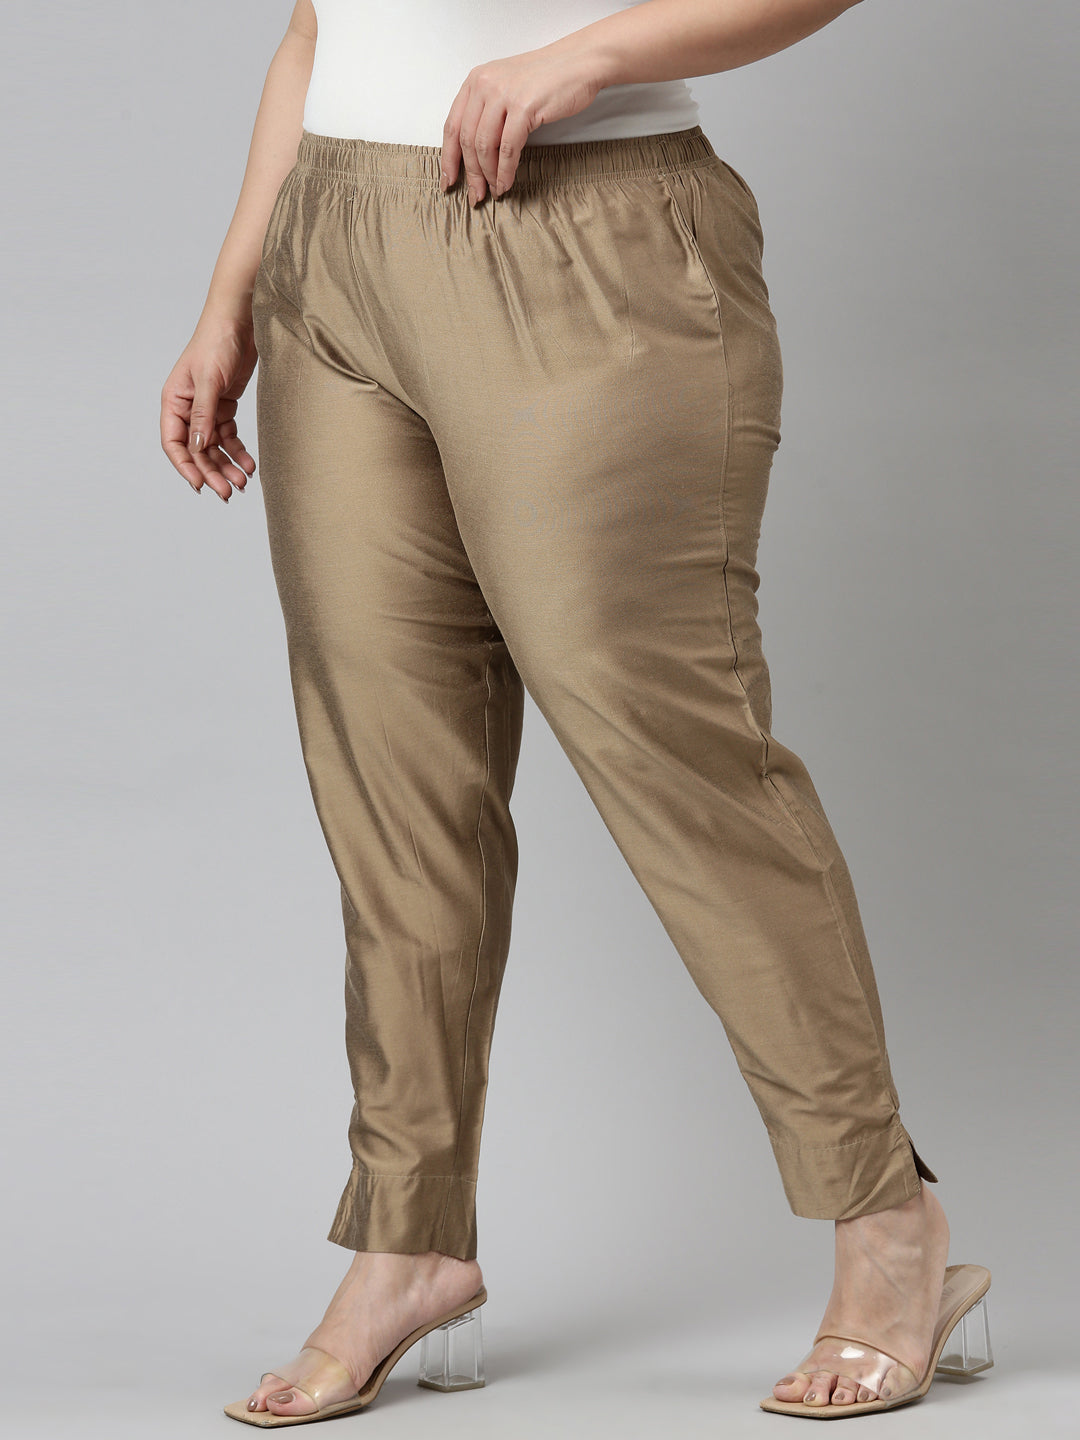 GO COLORS Metallic Pant M Beige in Hyderabad at best price by Go Colors   Justdial